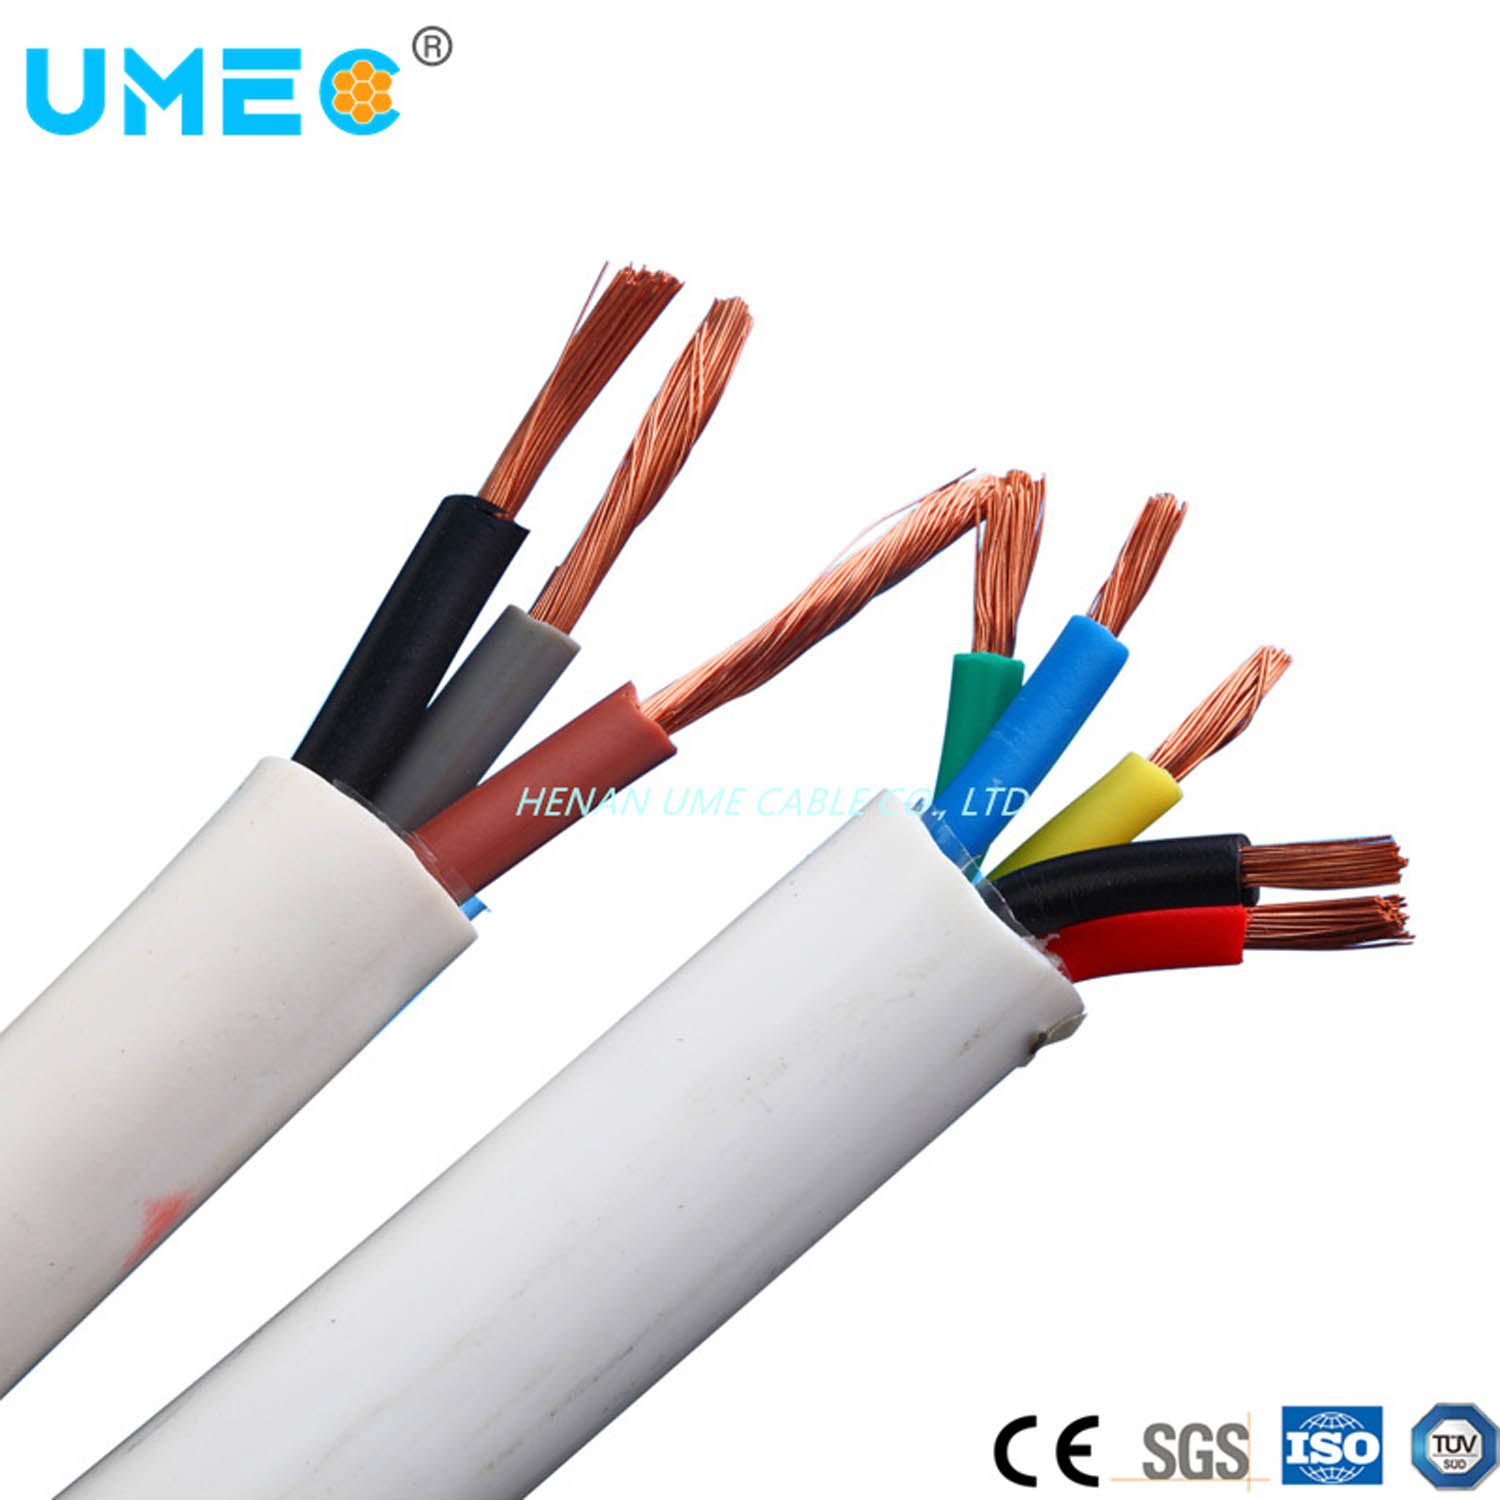 1X1.5mm2 1X6mm2 H07rn-F Cable High Flexibility Rubber Cable